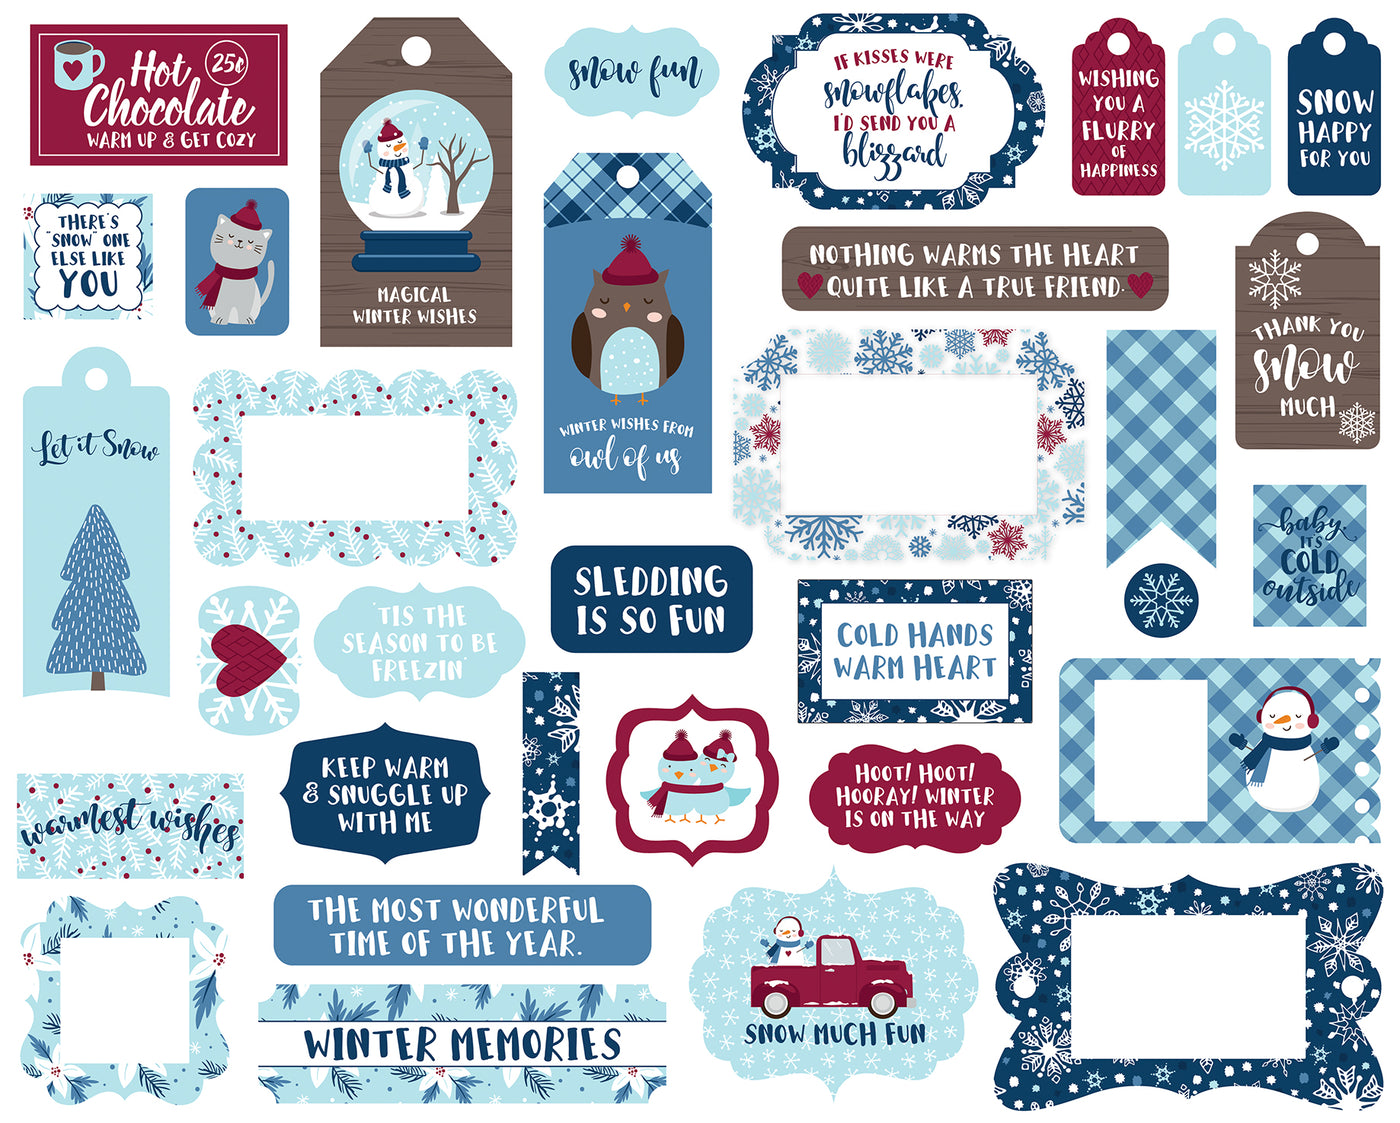 My Favorite Winter Frames & Tags Die Cut Cardstock Pack.  Pack includes 33 different die-cut shapes ready to embellish any project. 